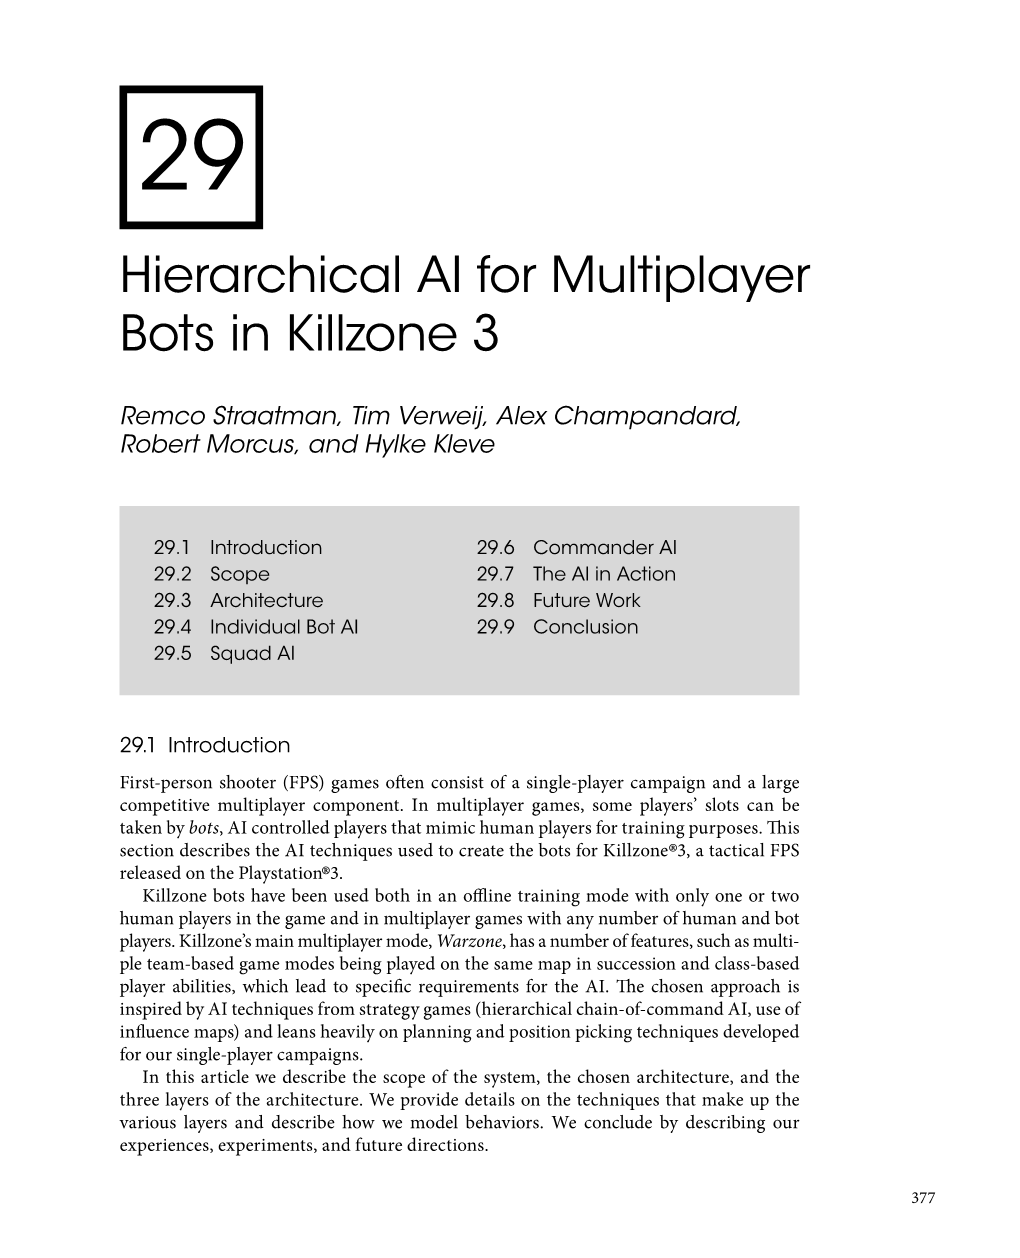 Hierarchical AI for Multiplayer Bots in Killzone 3